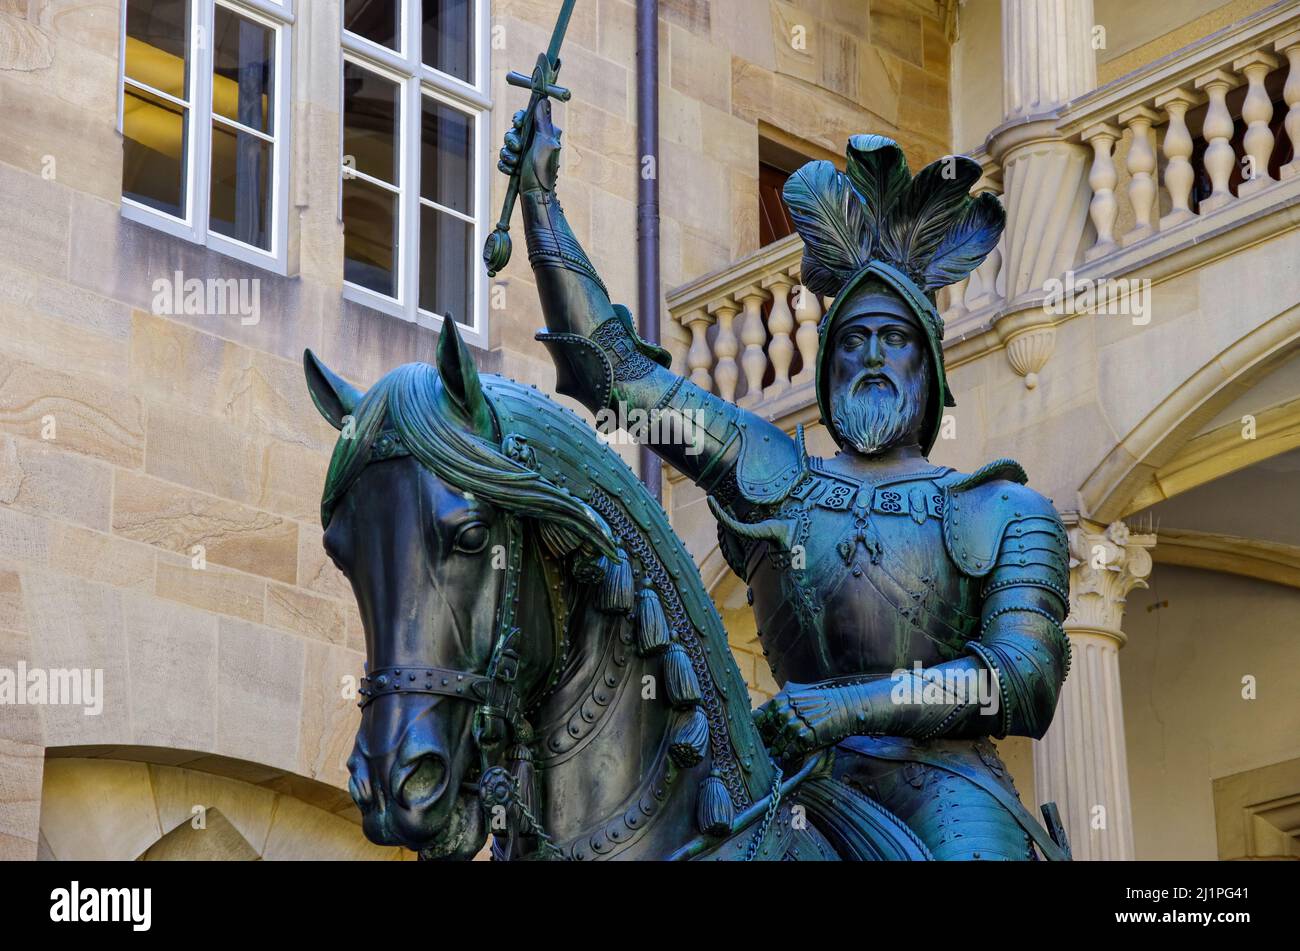 Stuttgart, Baden-Württemberg, Germany: Equestrian statue of Eberhard the Bearded, created by court sculptor Ludwig von Hofer. Stock Photo